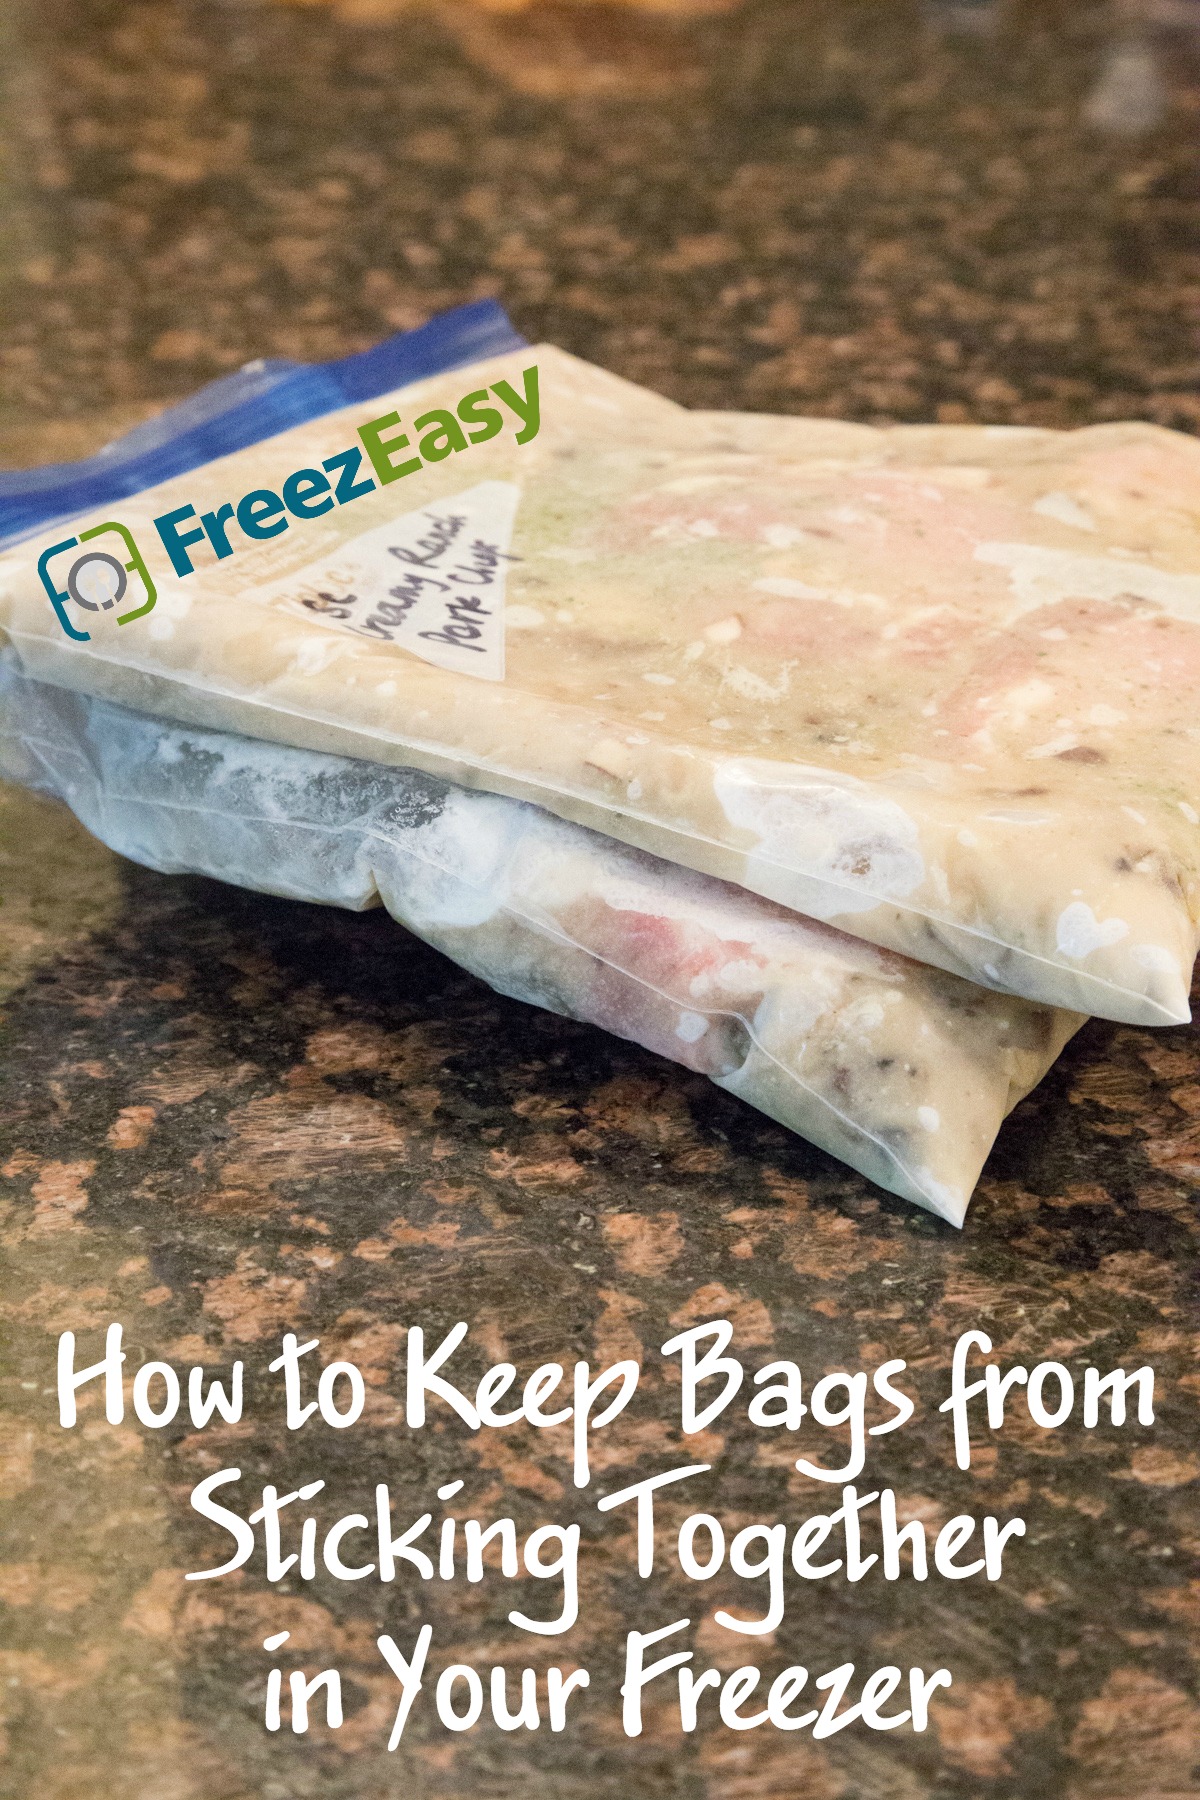 How to Keep Bags from Sticking Together in your Freezer